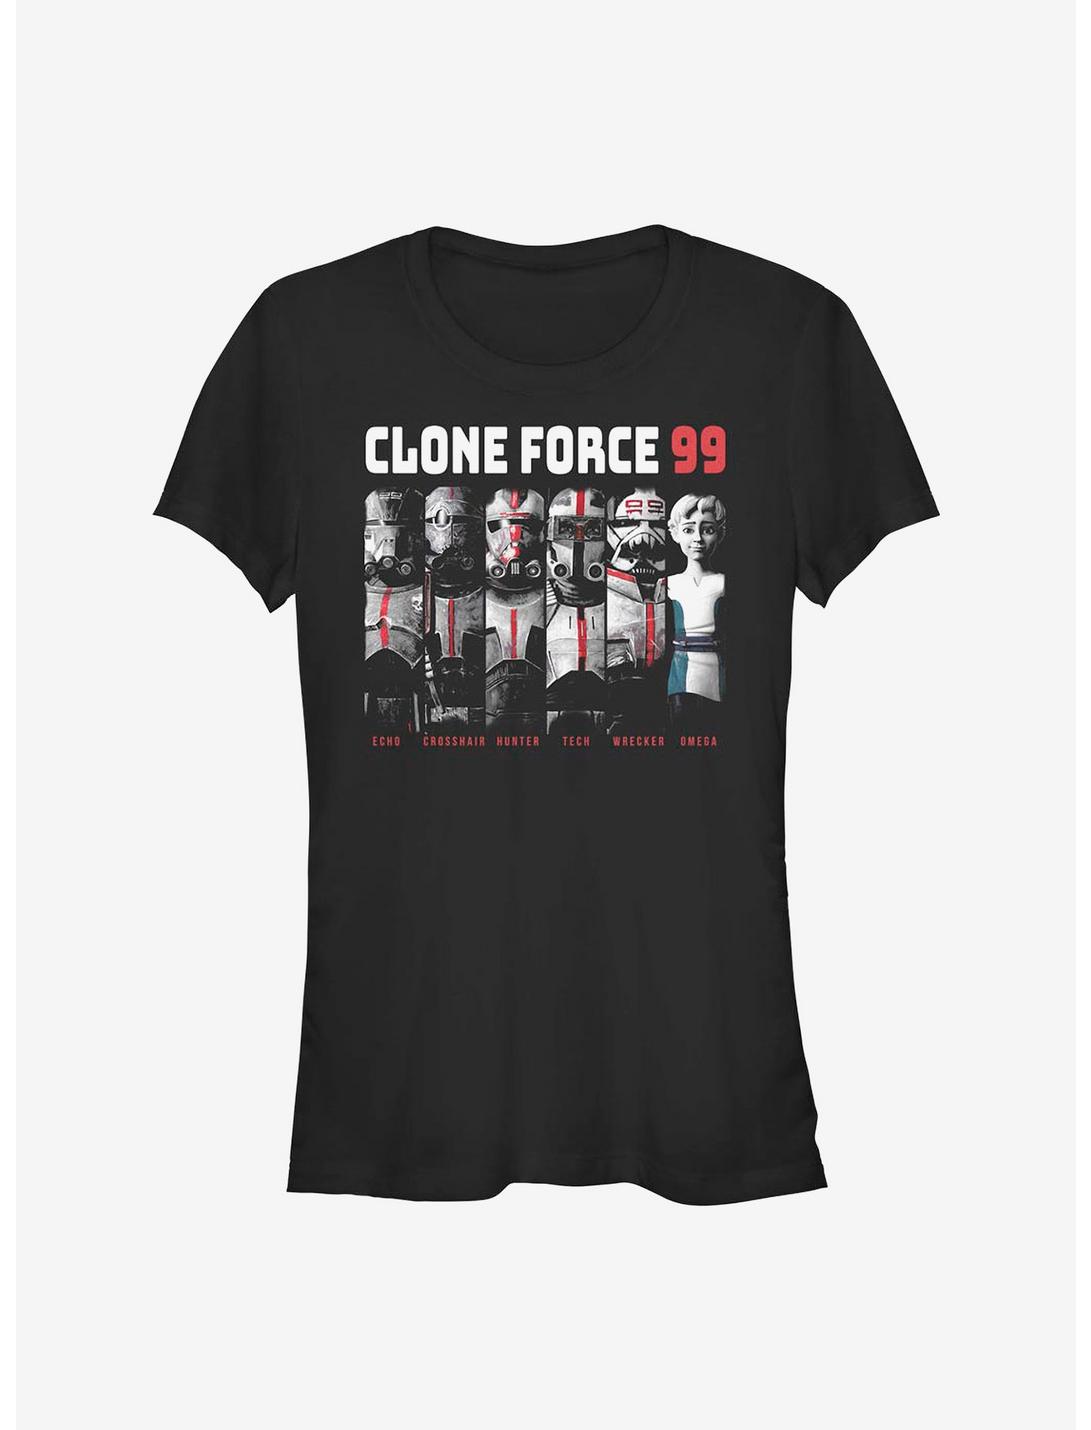 Star Wars: The Bad Batch Clone Force 99 Group Girls T-Shirt Hot Topic Exclusive, BLACK, hi-res